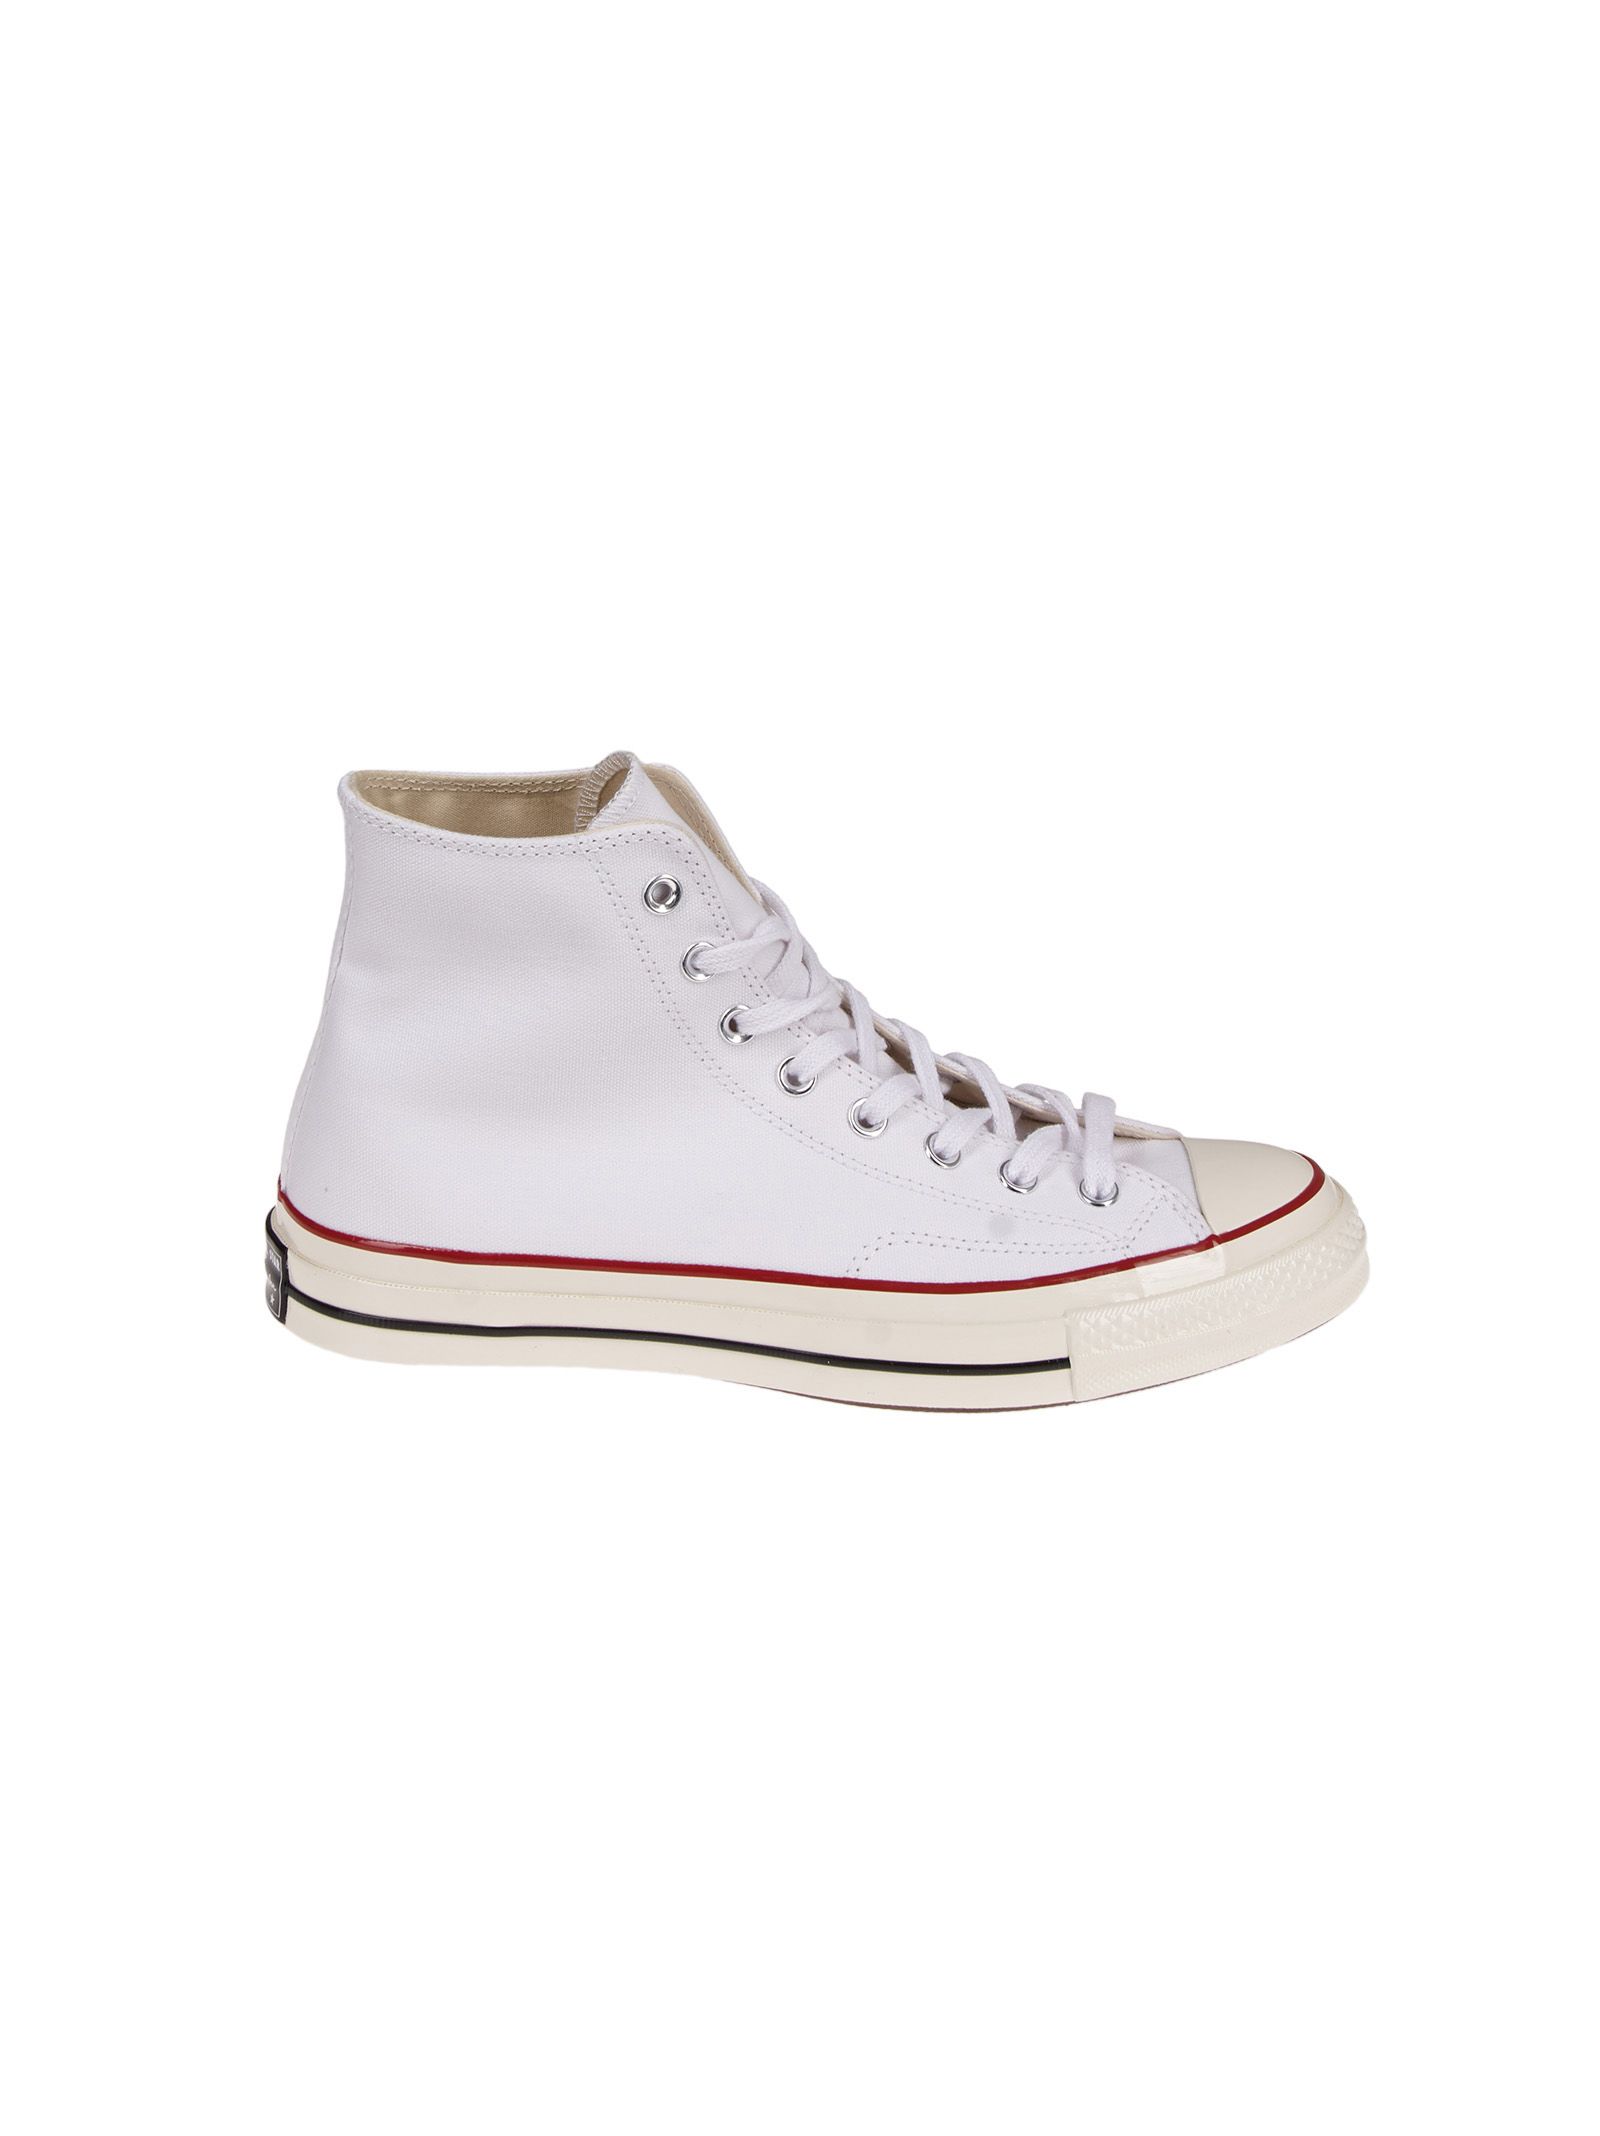 Converse Eyelet Applique Sneakers - white - 10583119 | italist